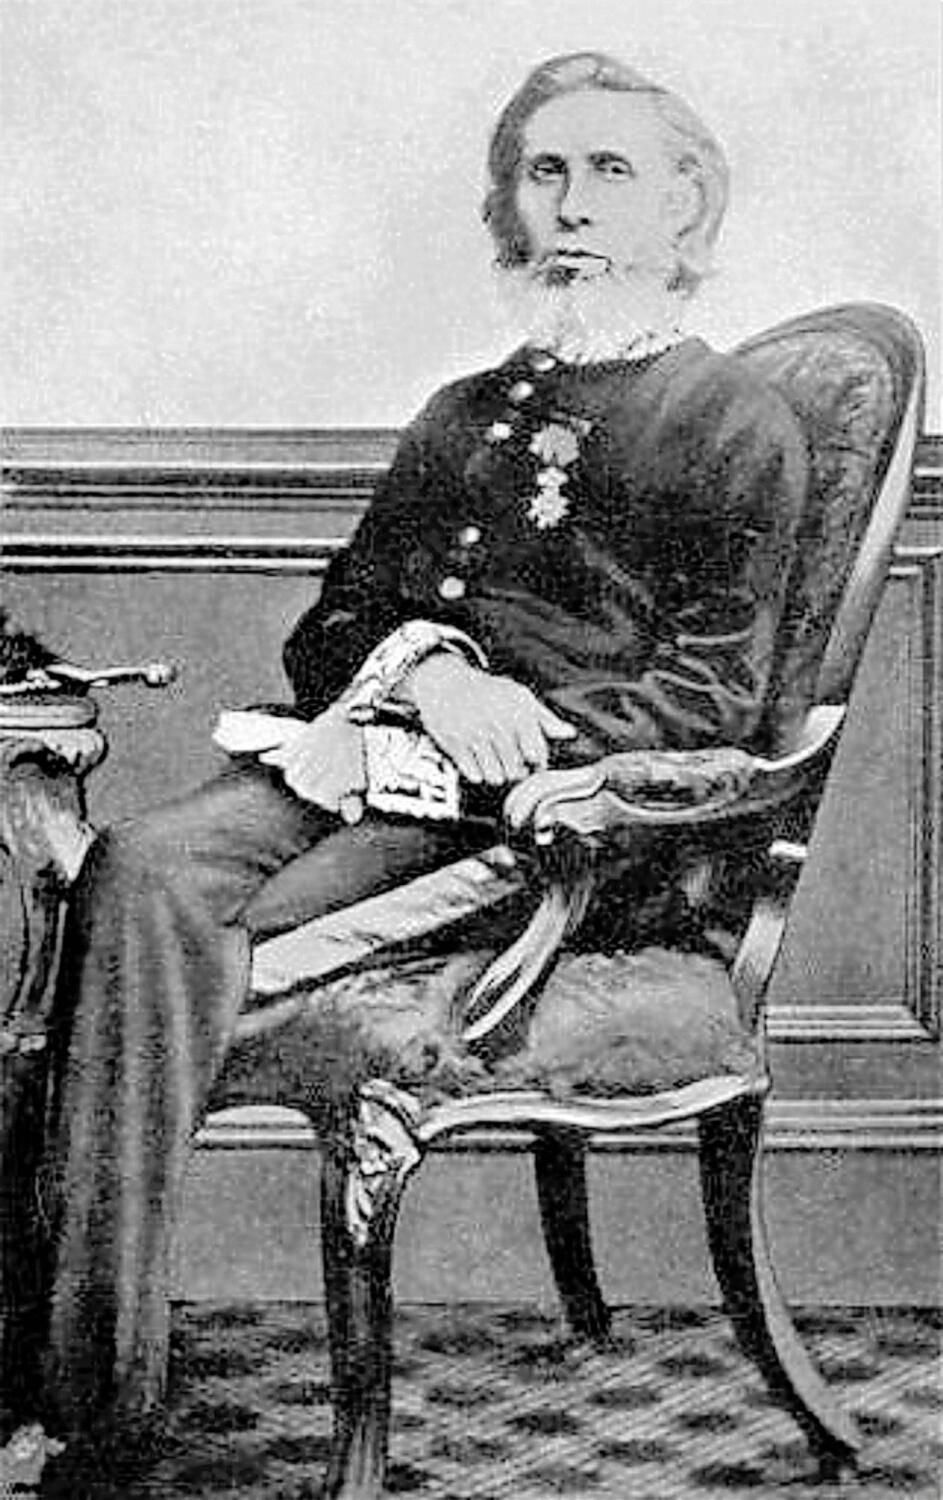 Sir William Wilde, father of the poet and author Oscar Wilde, was one of the most famous and prolific antiquarians of Victorian ireland.